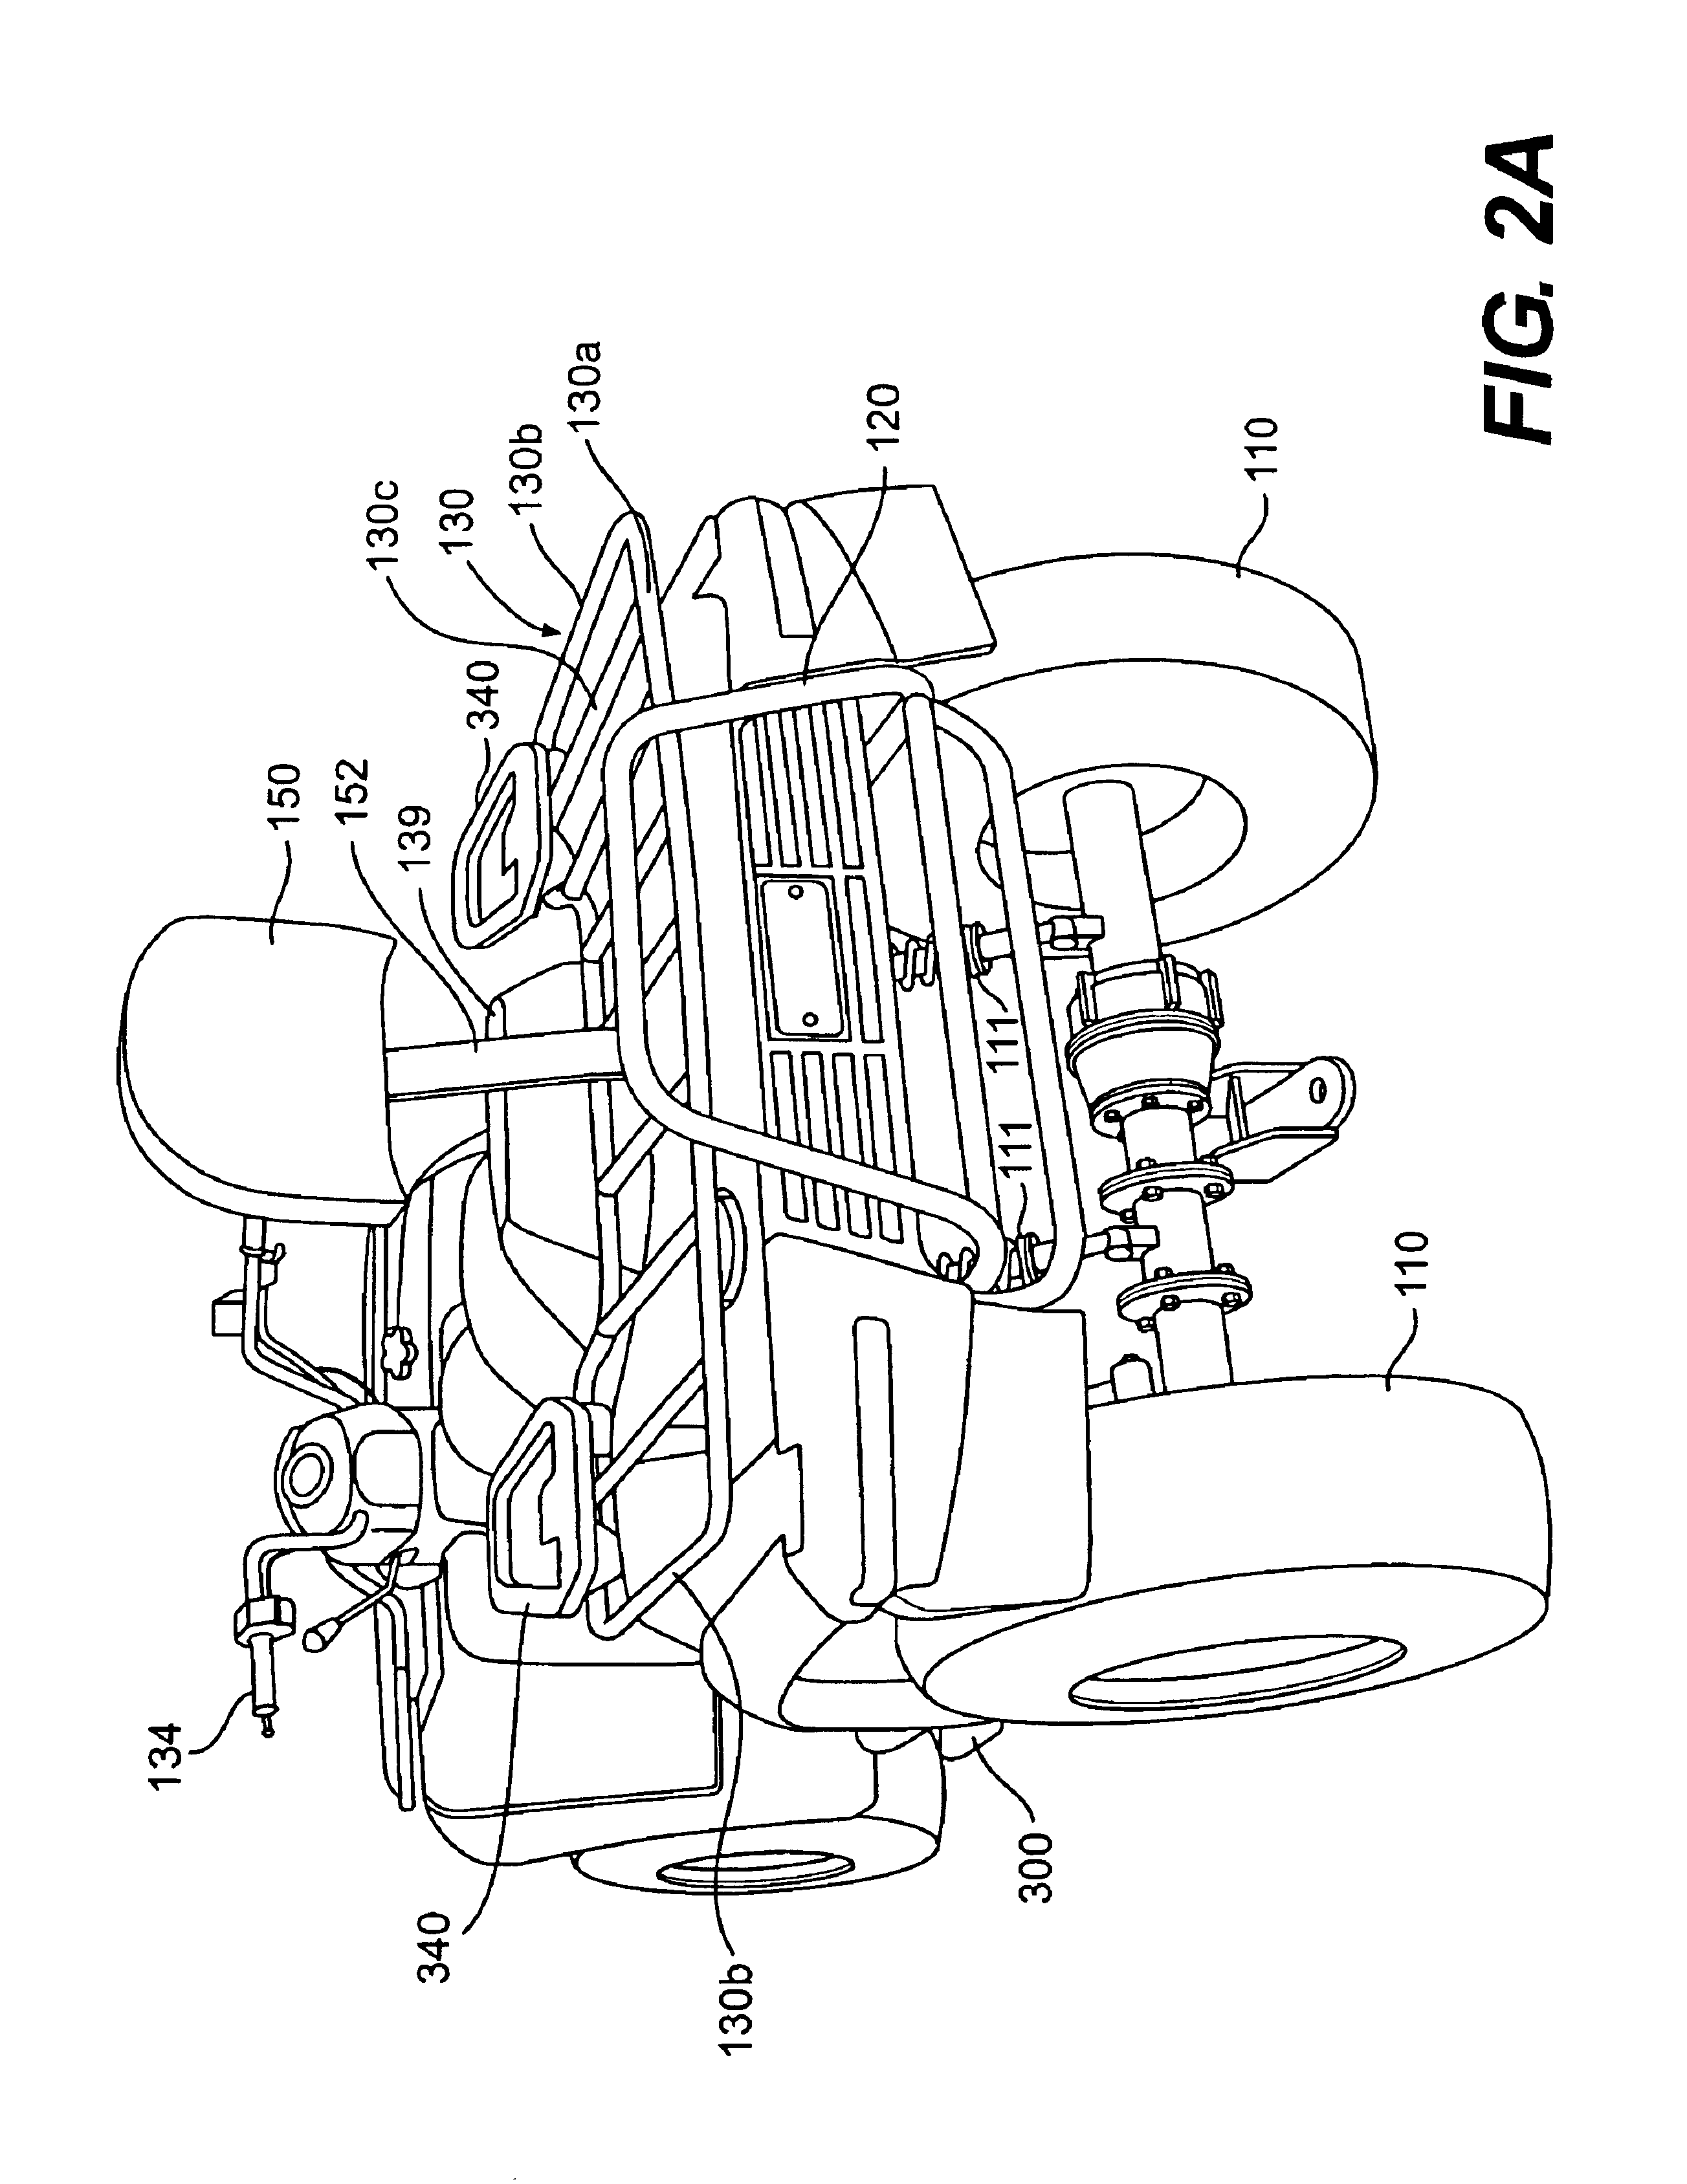 ATV with improved driver positioning and/or multi passenger capacity